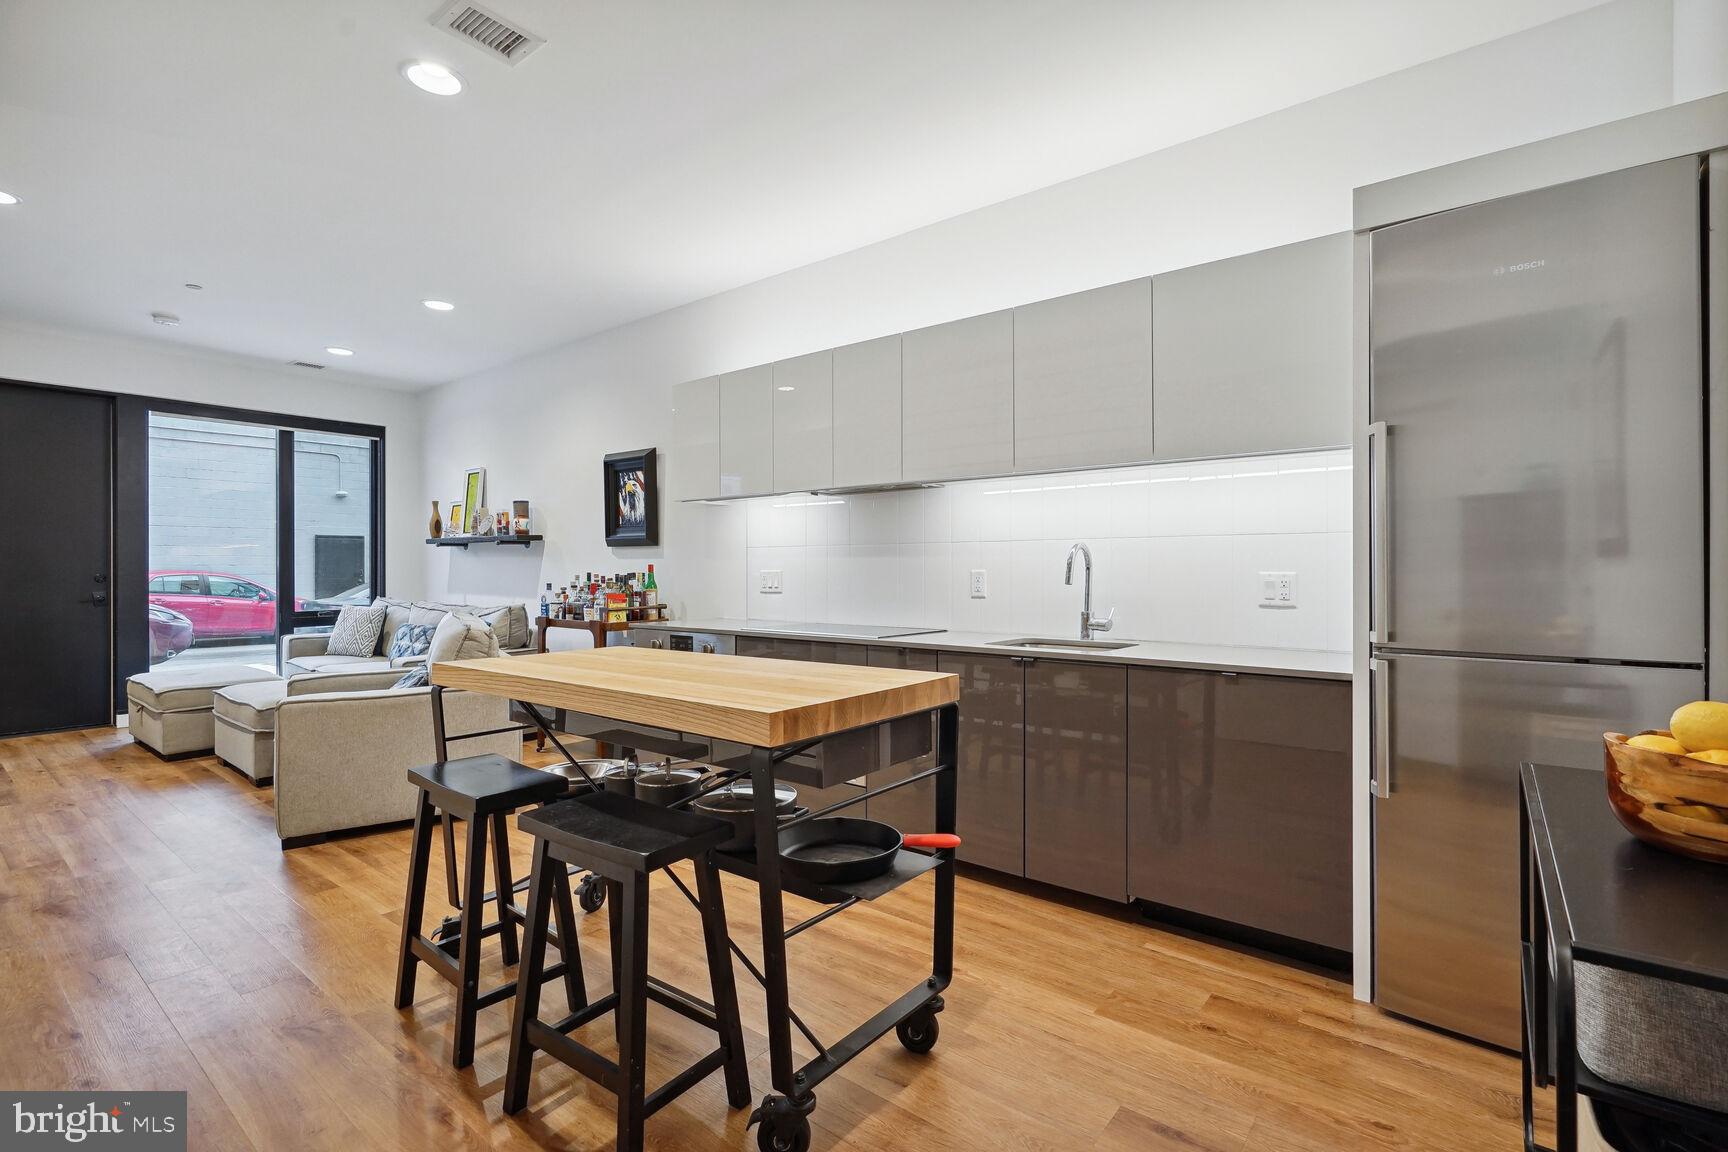 a kitchen with stainless steel appliances granite countertop a table chairs sink refrigerator and microwave